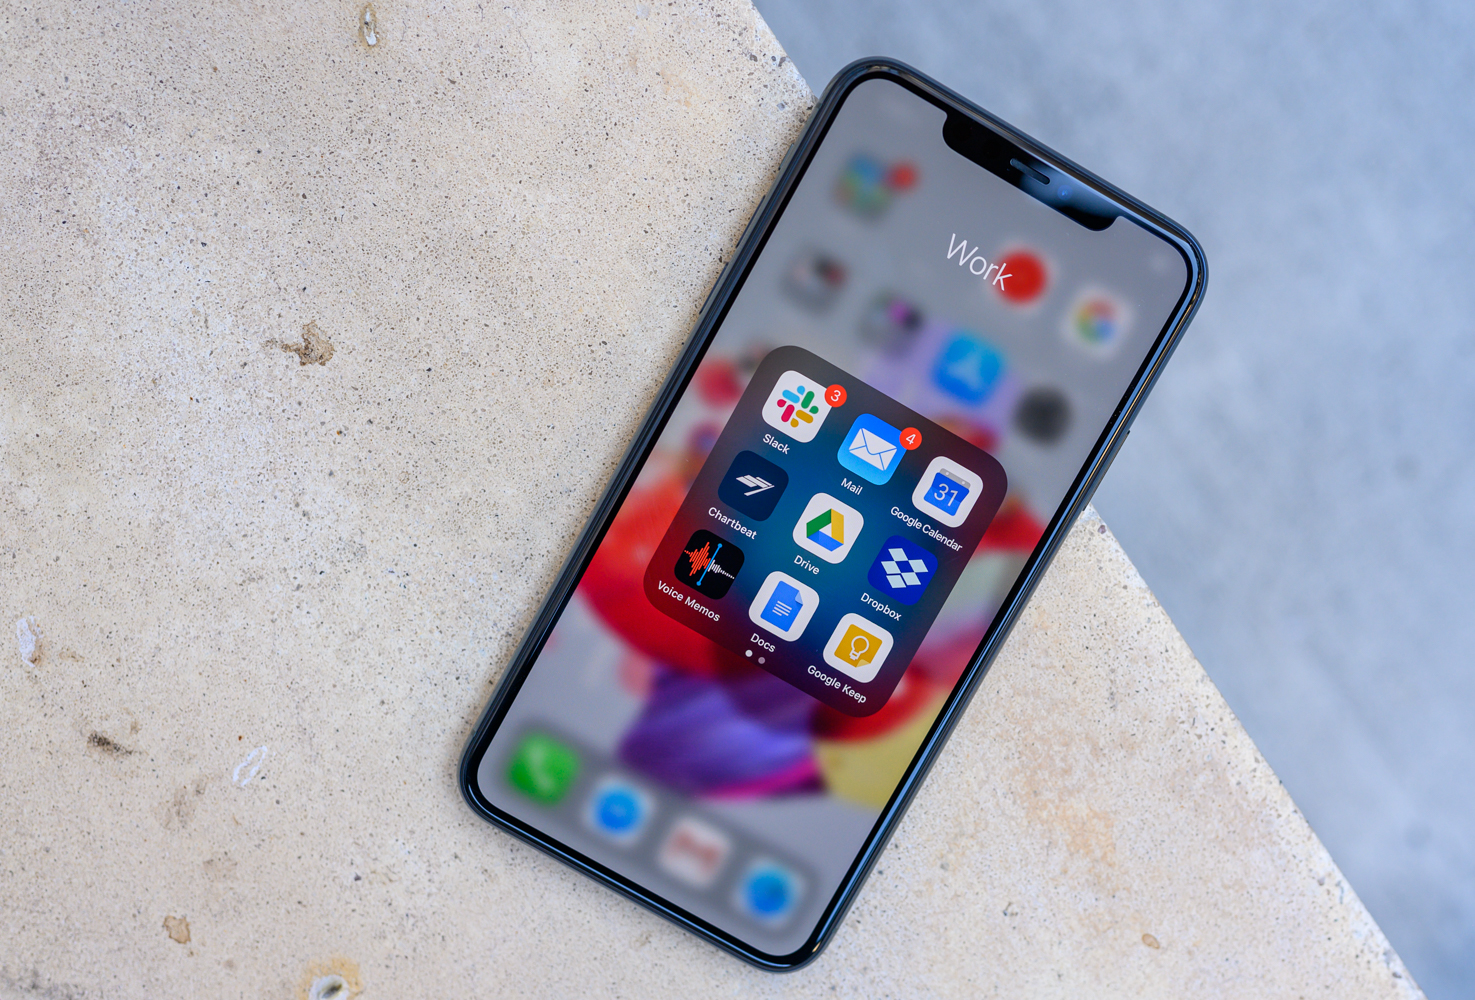 Apple iPhone 11 Pro and Pro Max review: Better, but not